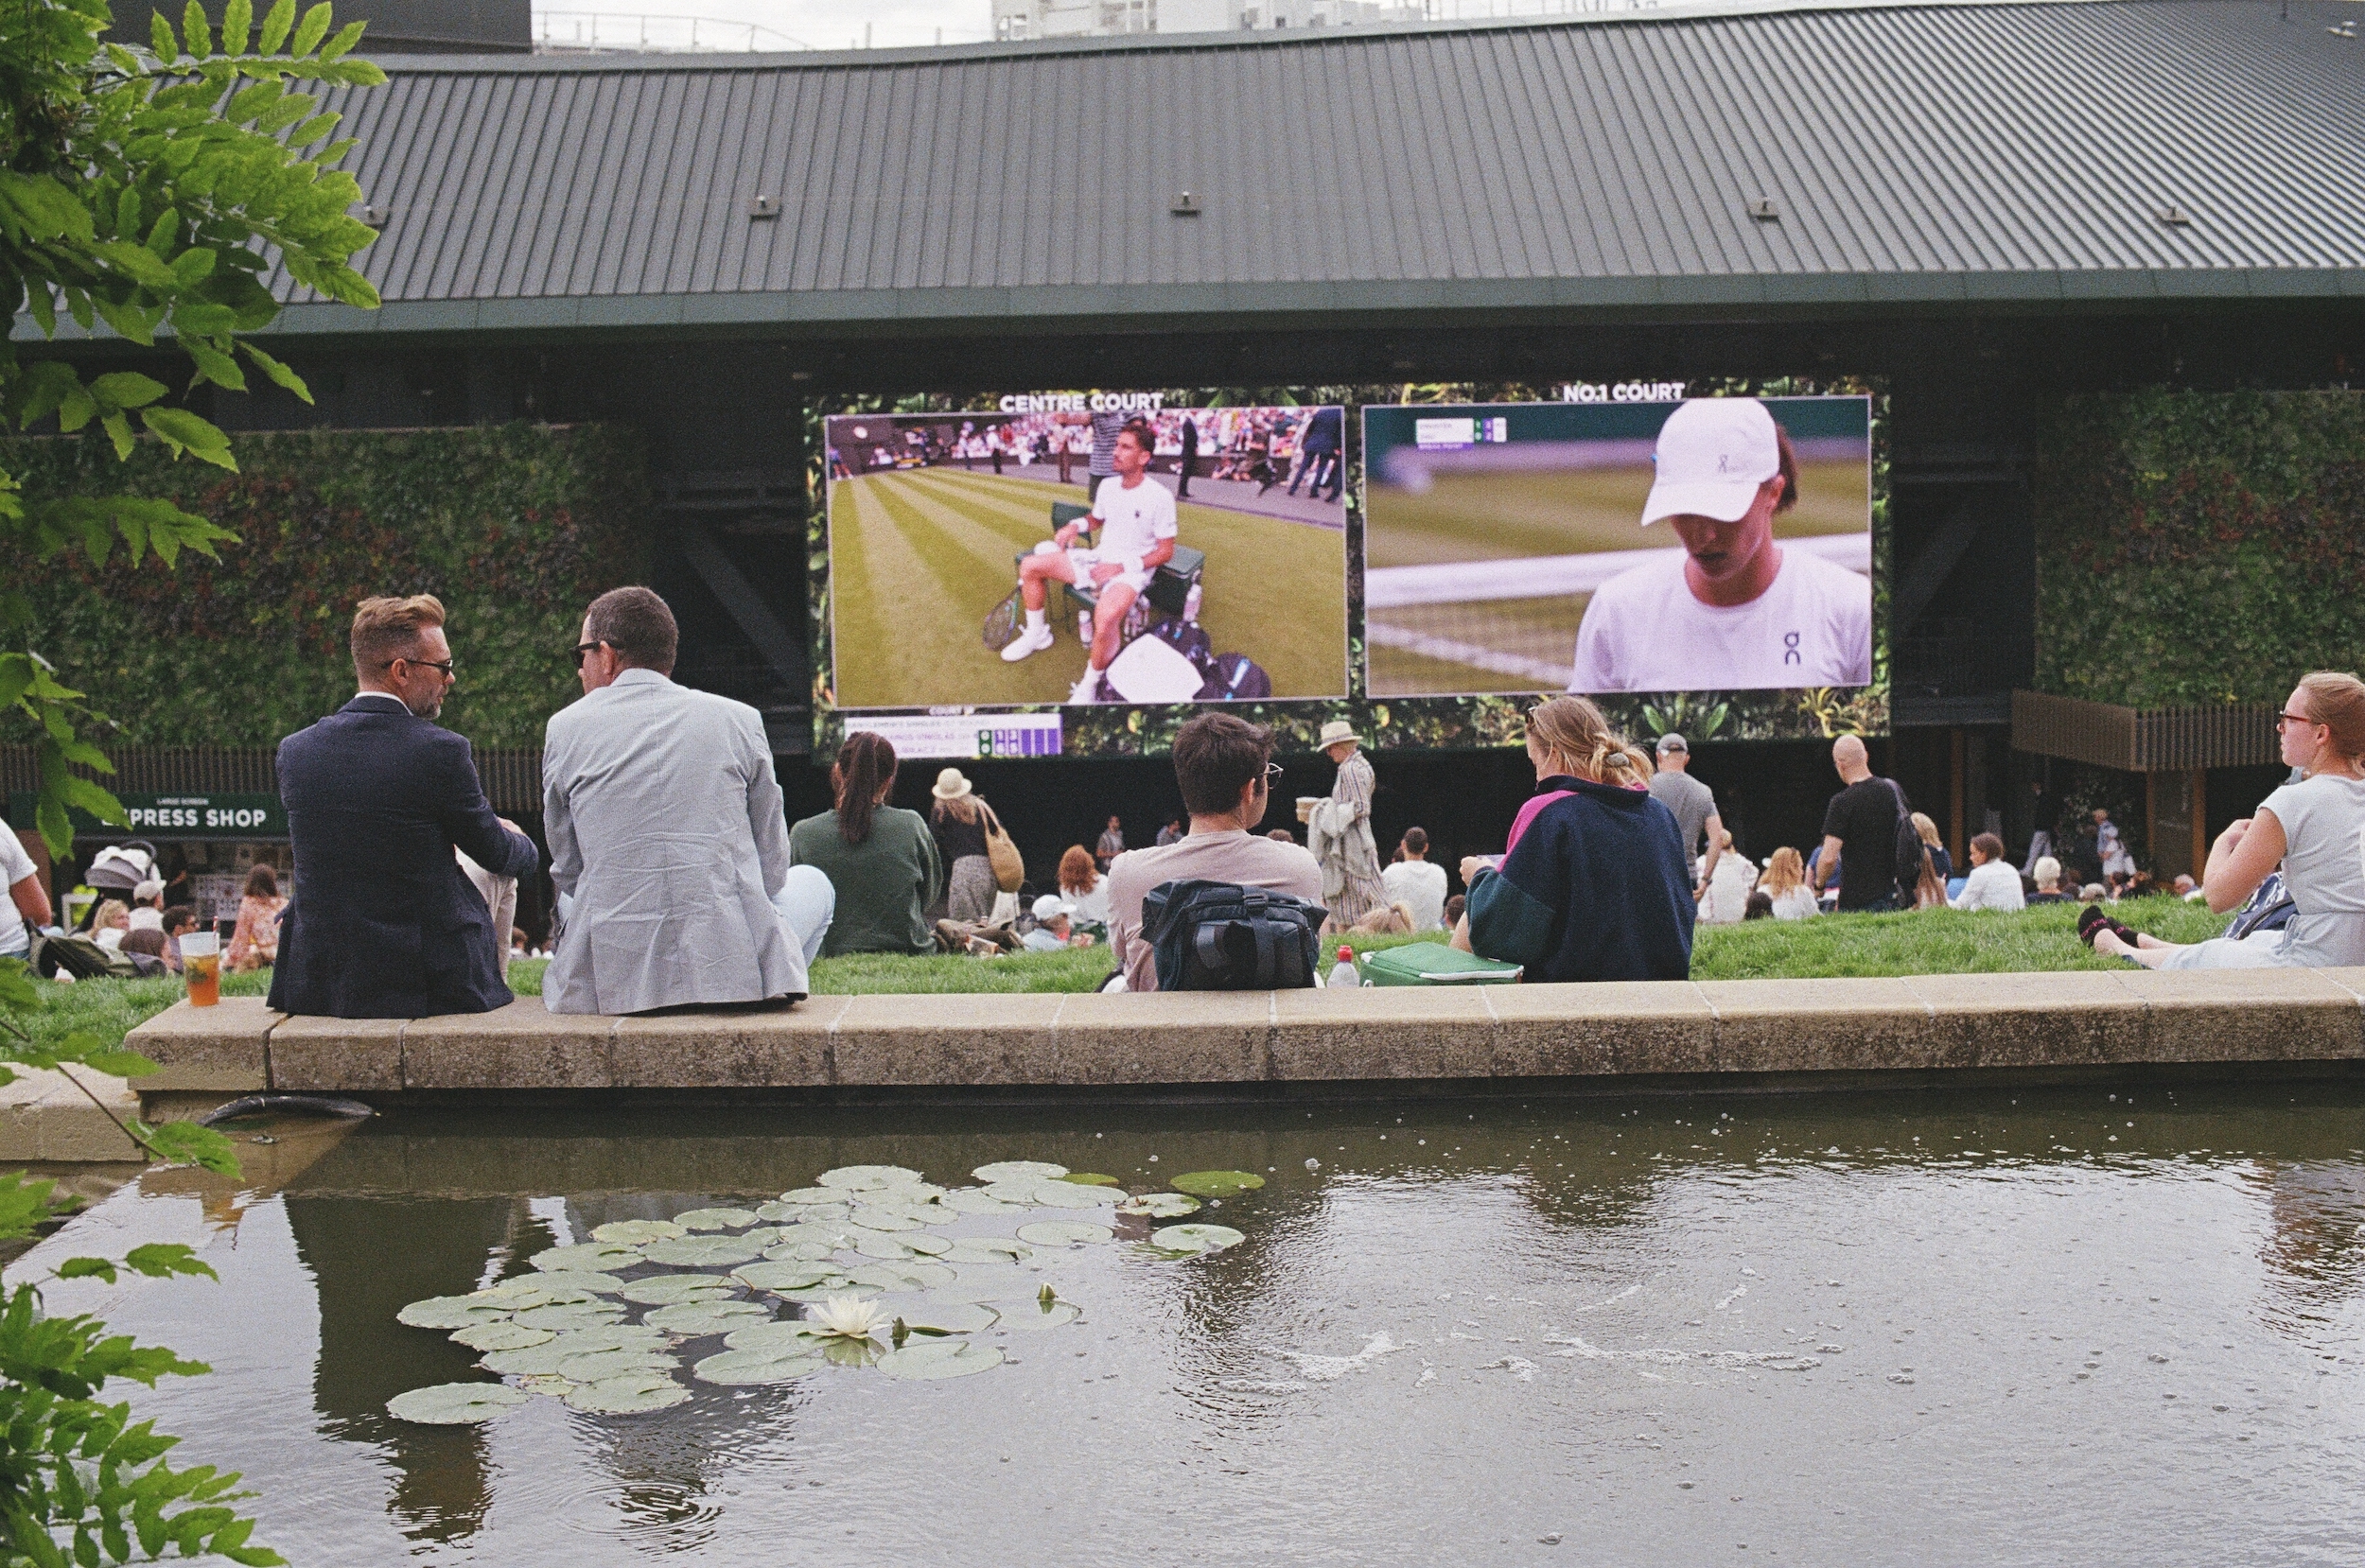 Fans take in some Wimbledon matches at Murray Mound.